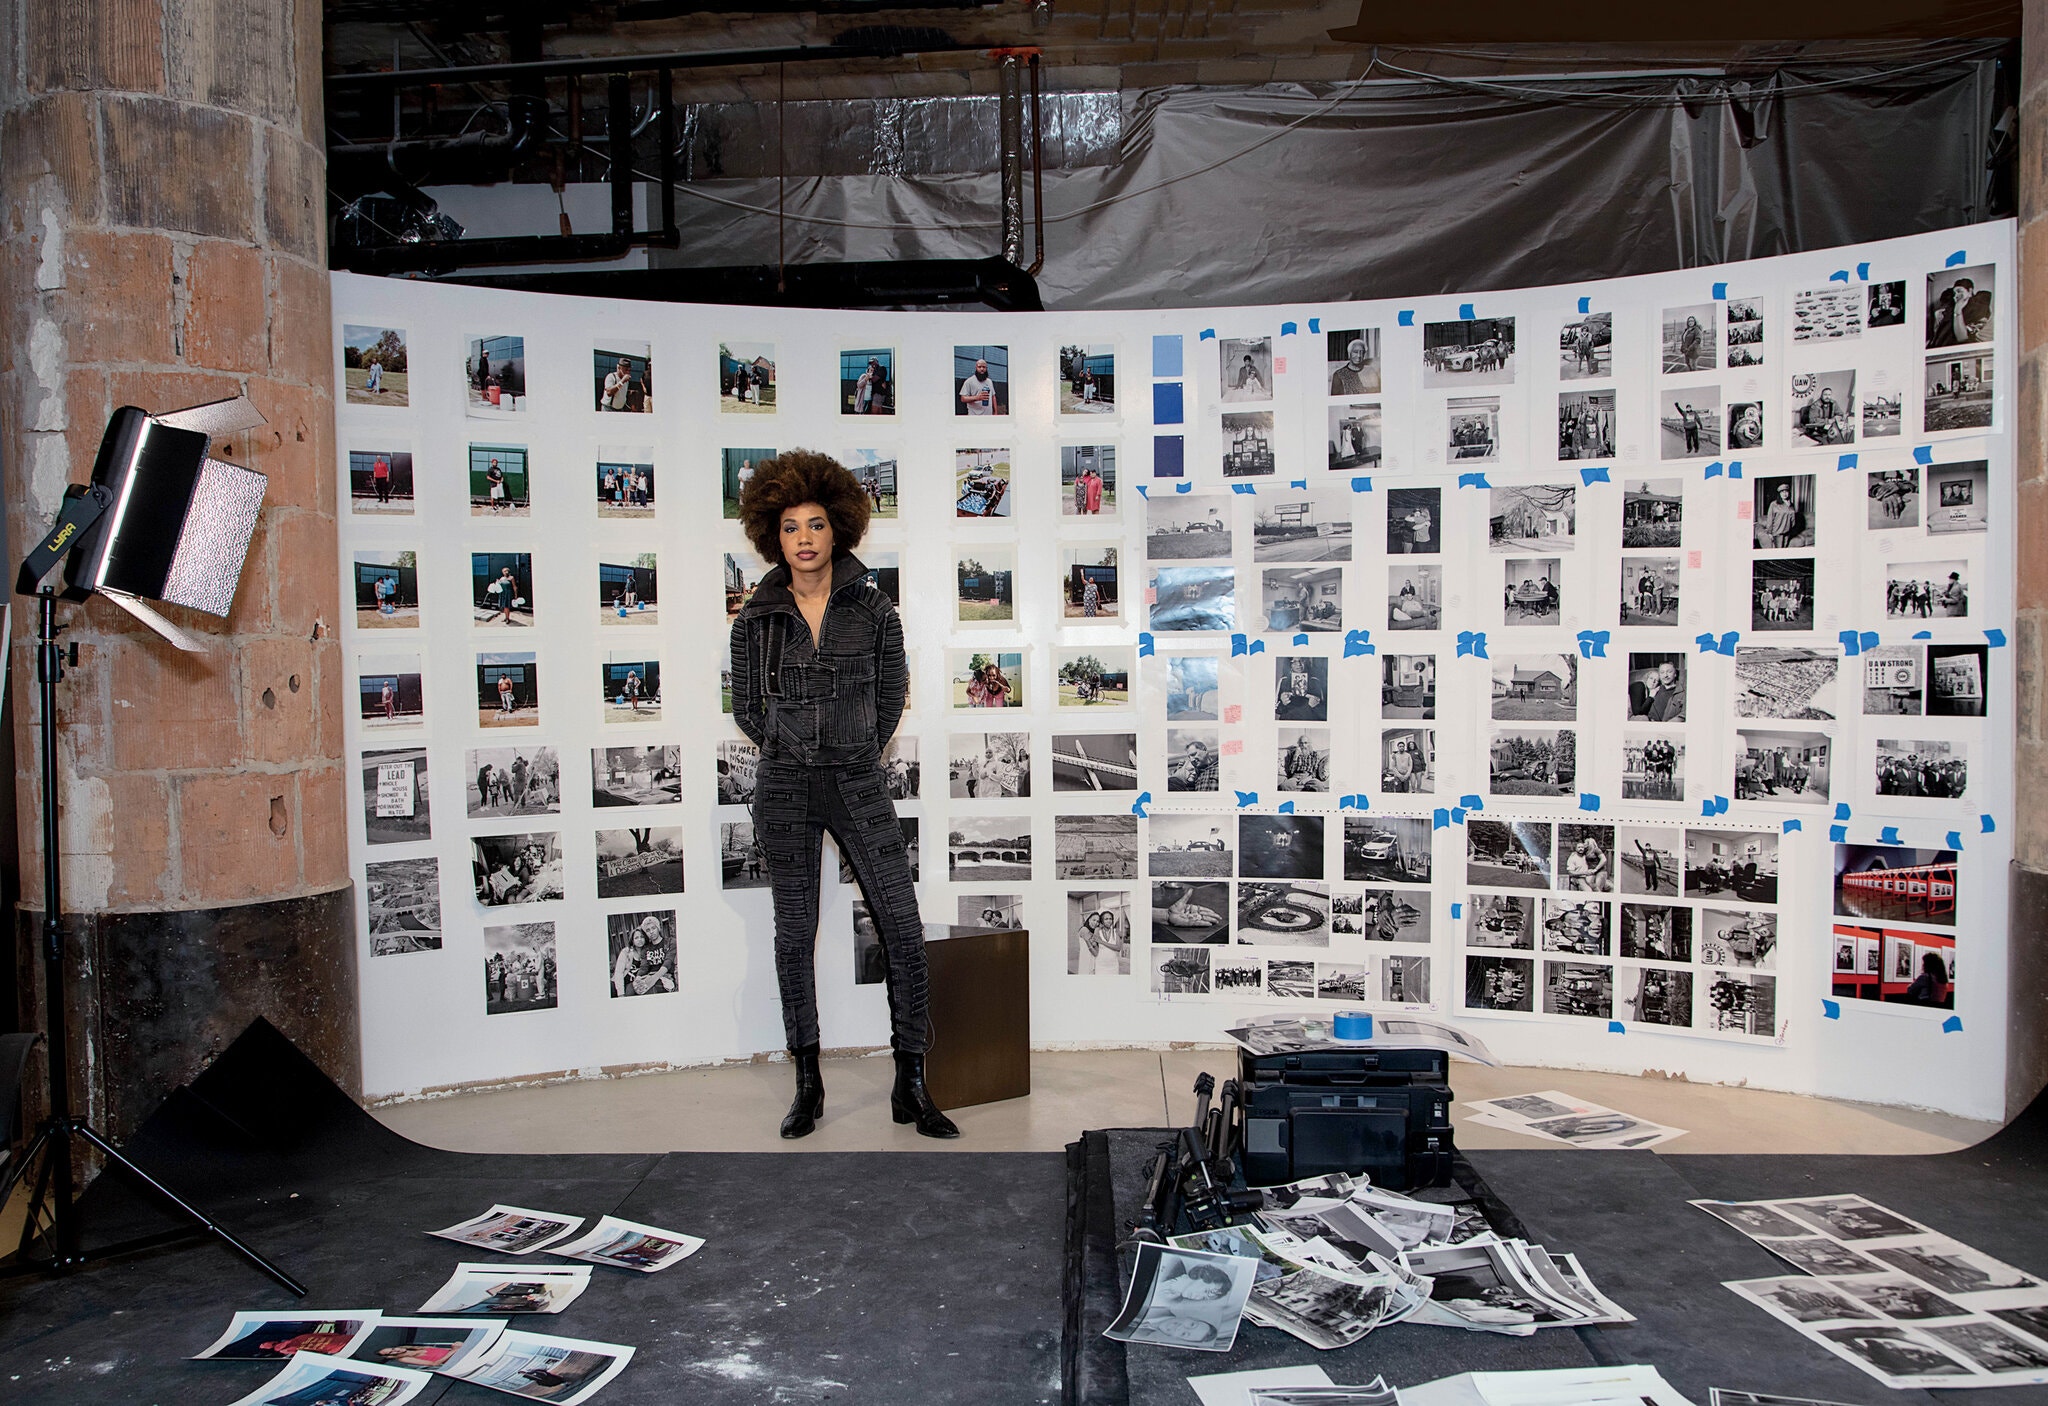 In an industrial studio space, a Black woman with an afro, wearing a black jean jacket and pants stands in front of a white wall filled with columns of photographs taped up with blue tape. Around her, other photoraphs are arranged on the floor. A large light stands to the left.